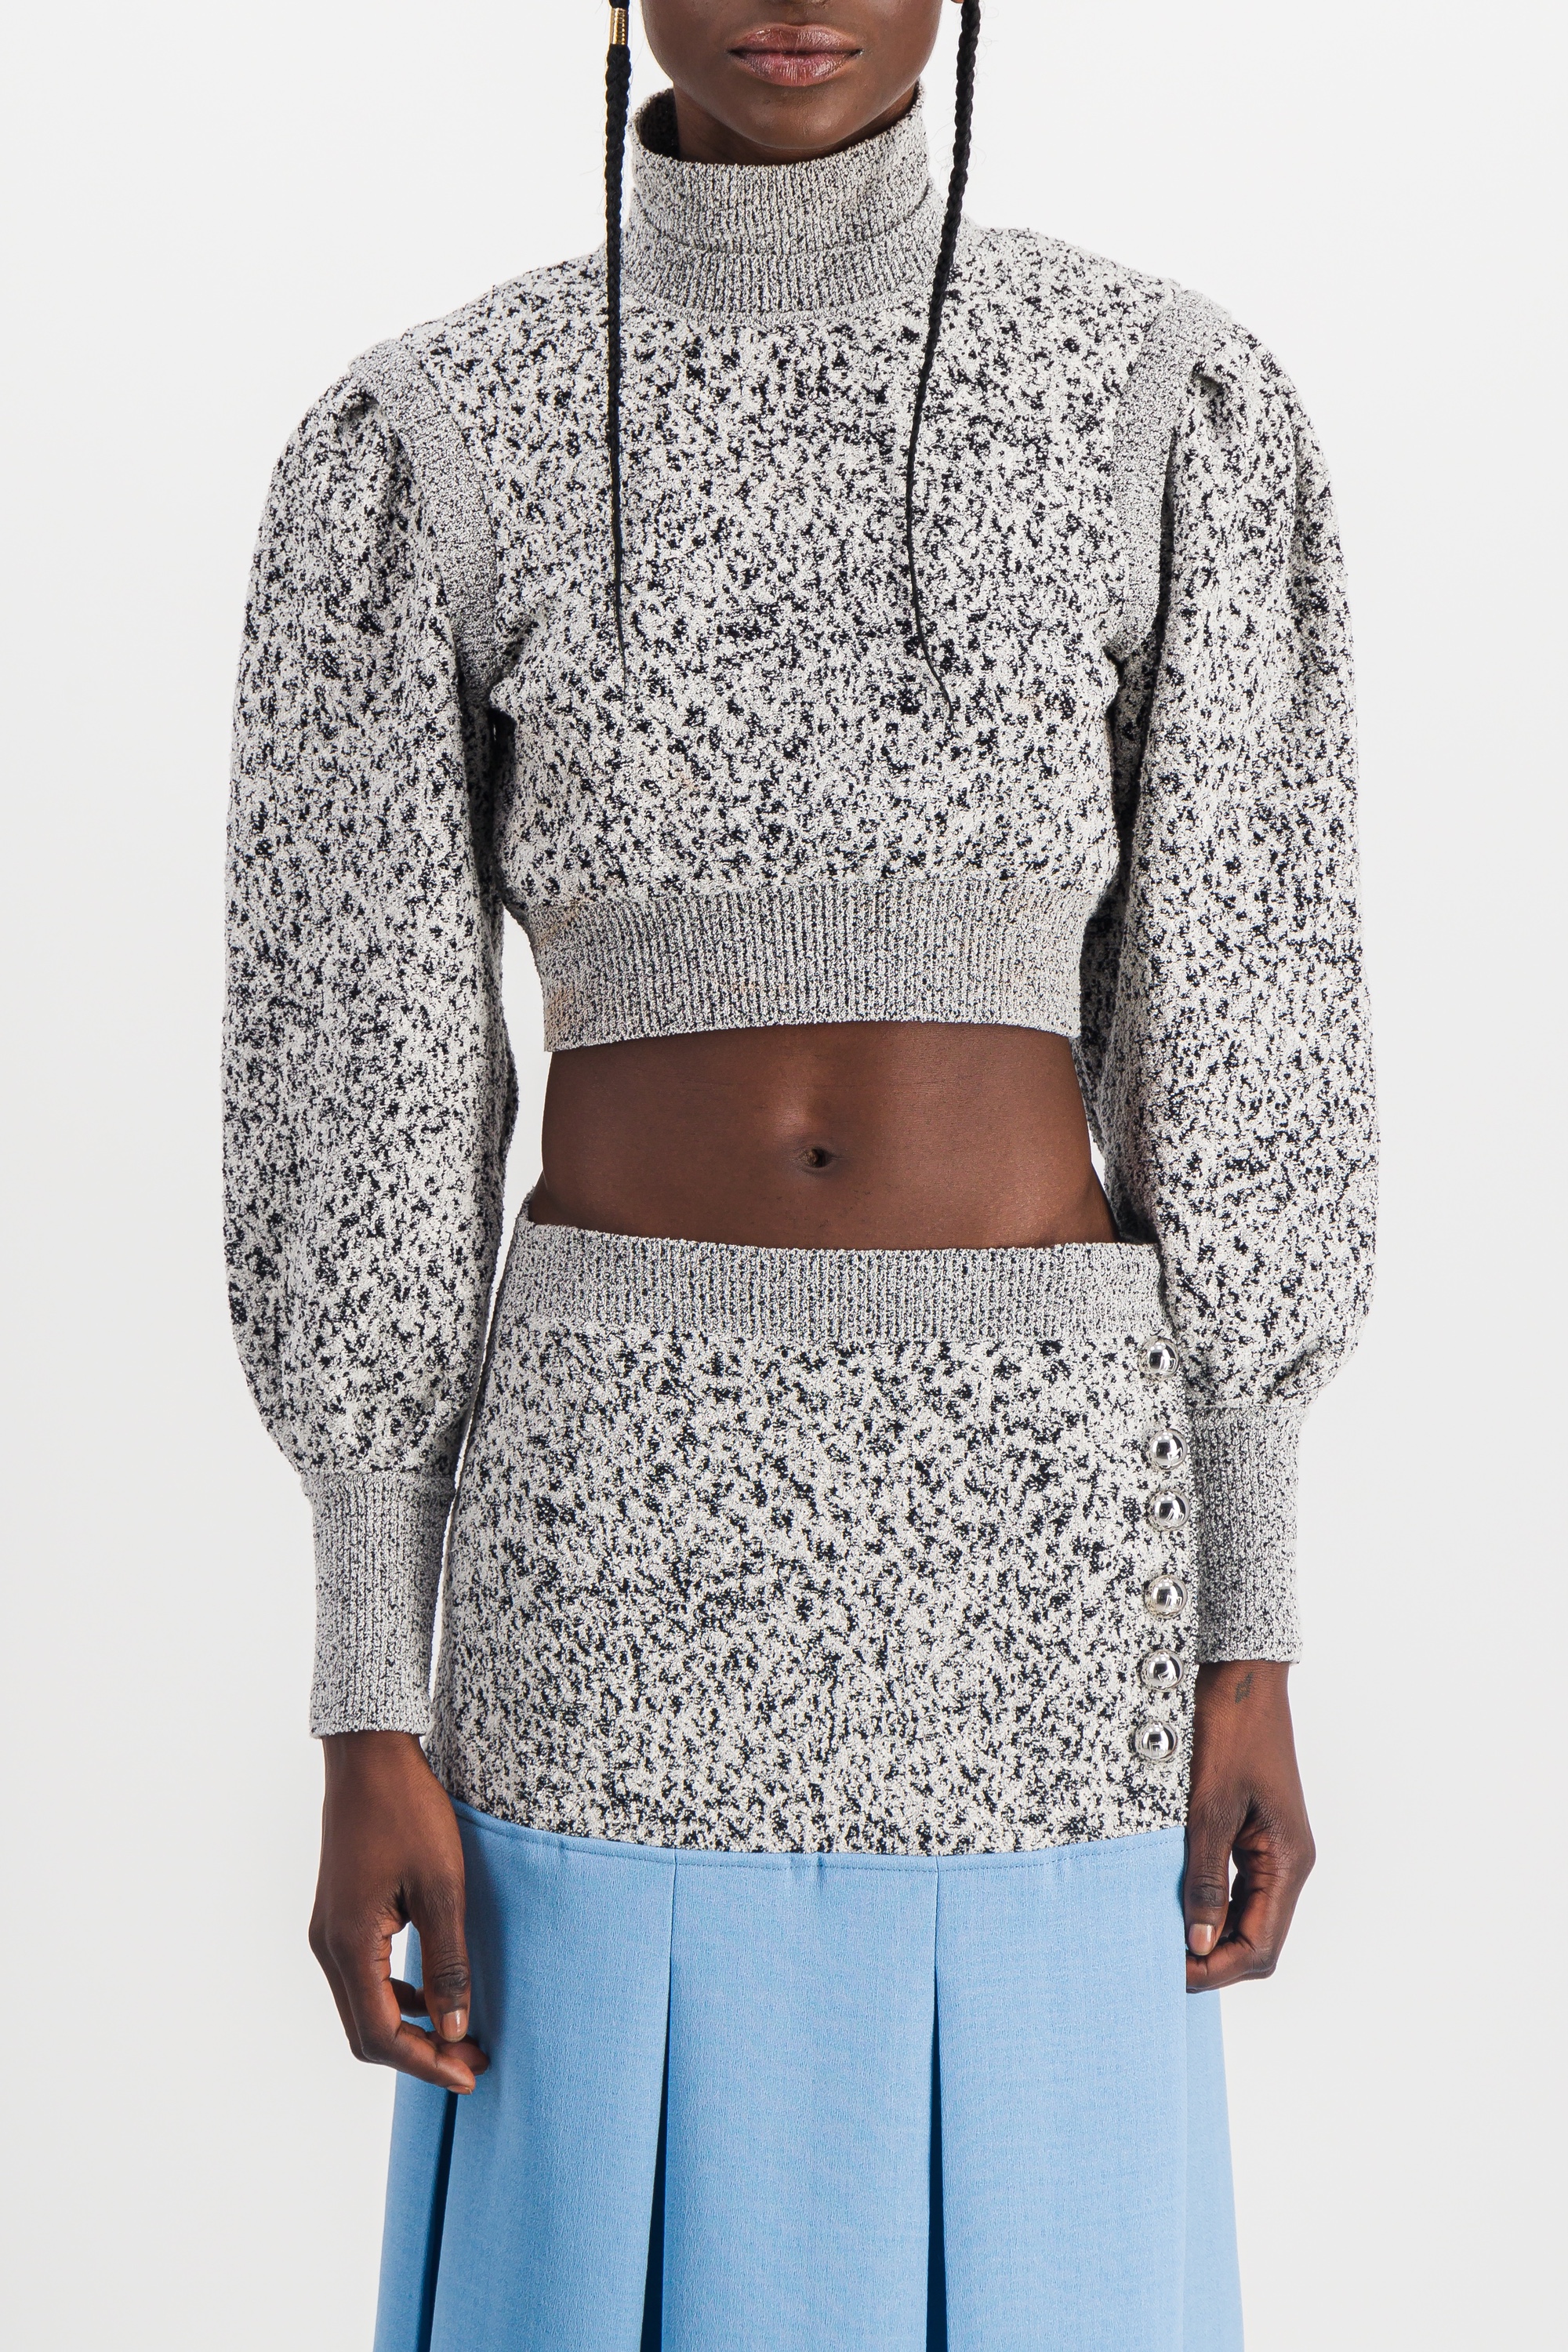 Paco Rabanne Jacquard Concrete Cropped Sweater In Grey